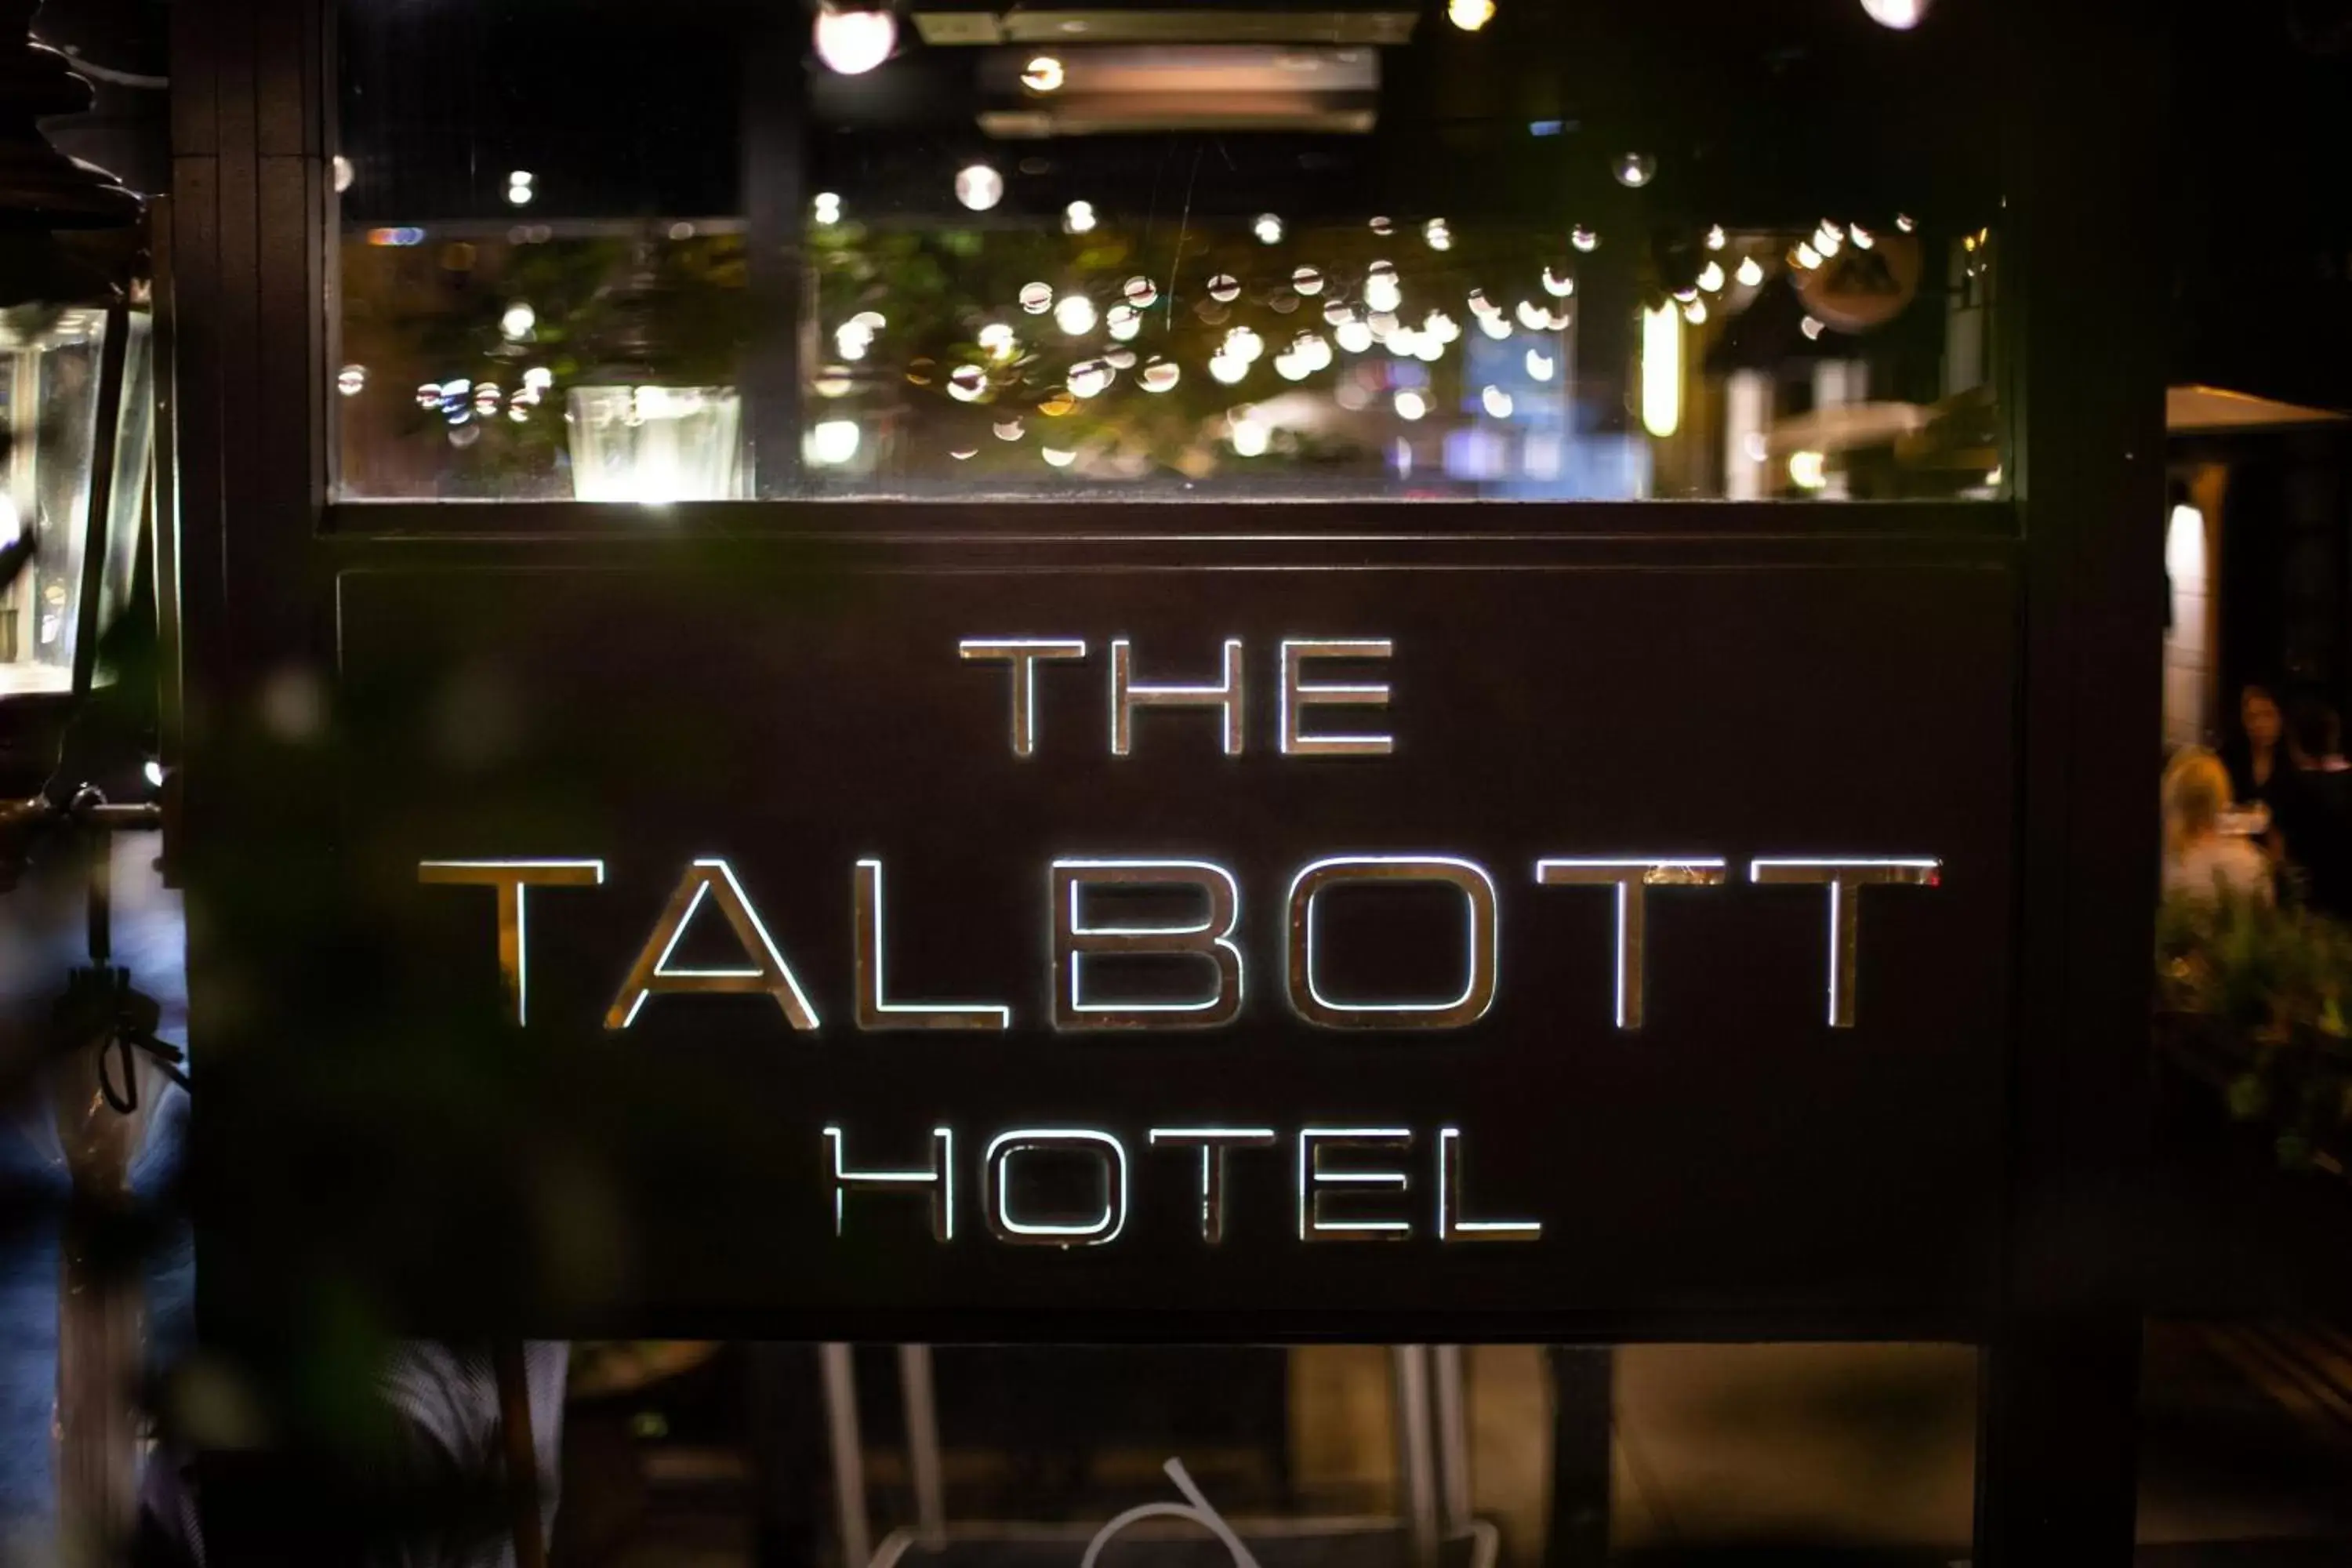 Property building in The Talbott Hotel